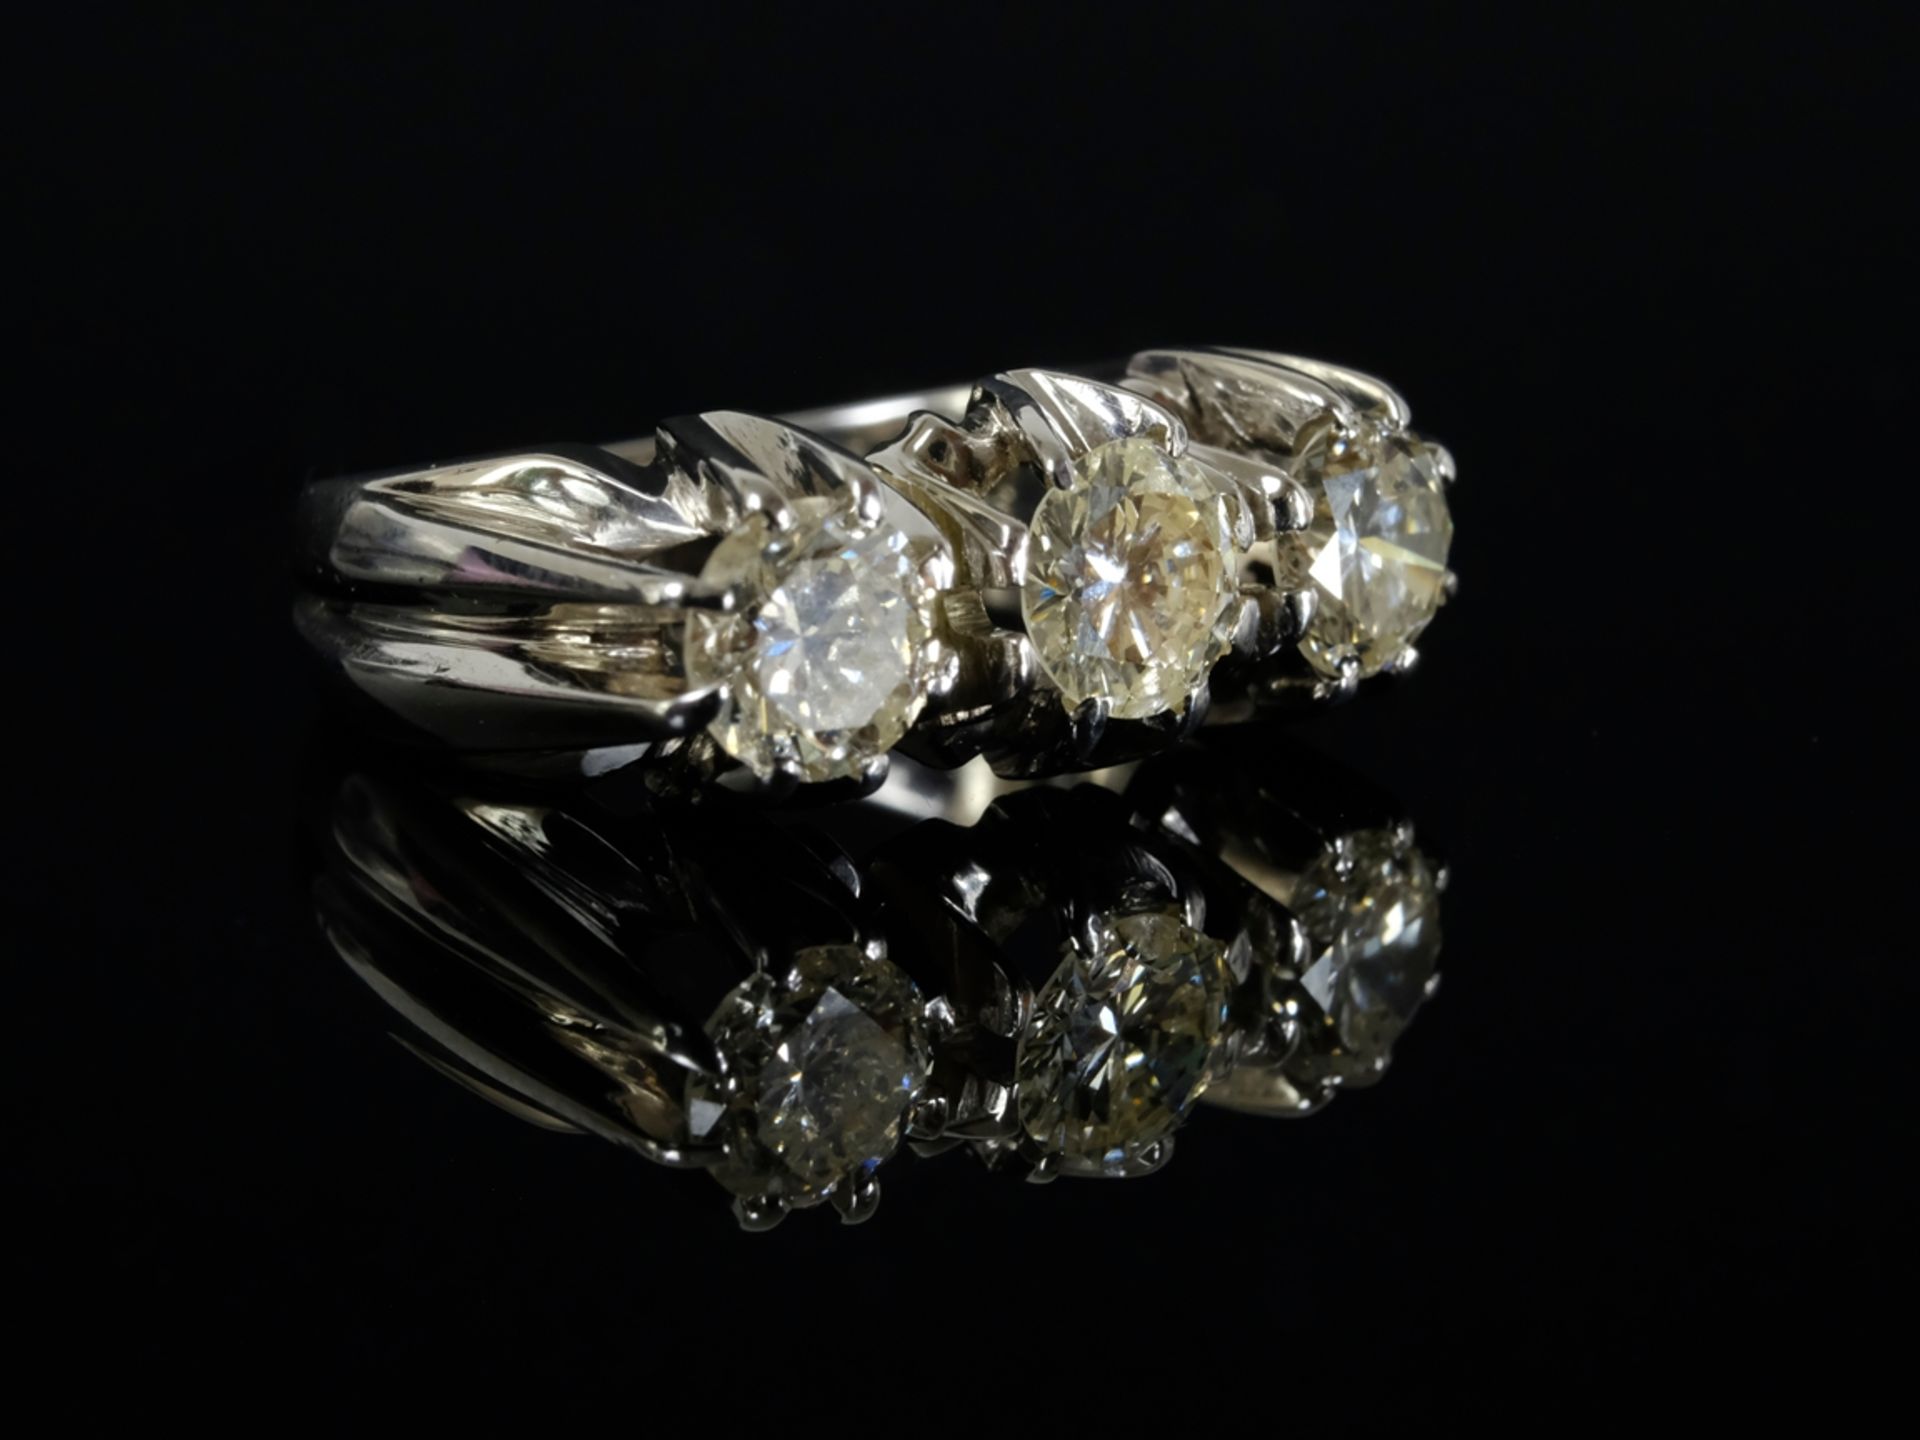 BRILLANT RING with three large brilliants, entire band around 2.25ct, approx. g-p1, 750 white gold, - Image 2 of 2